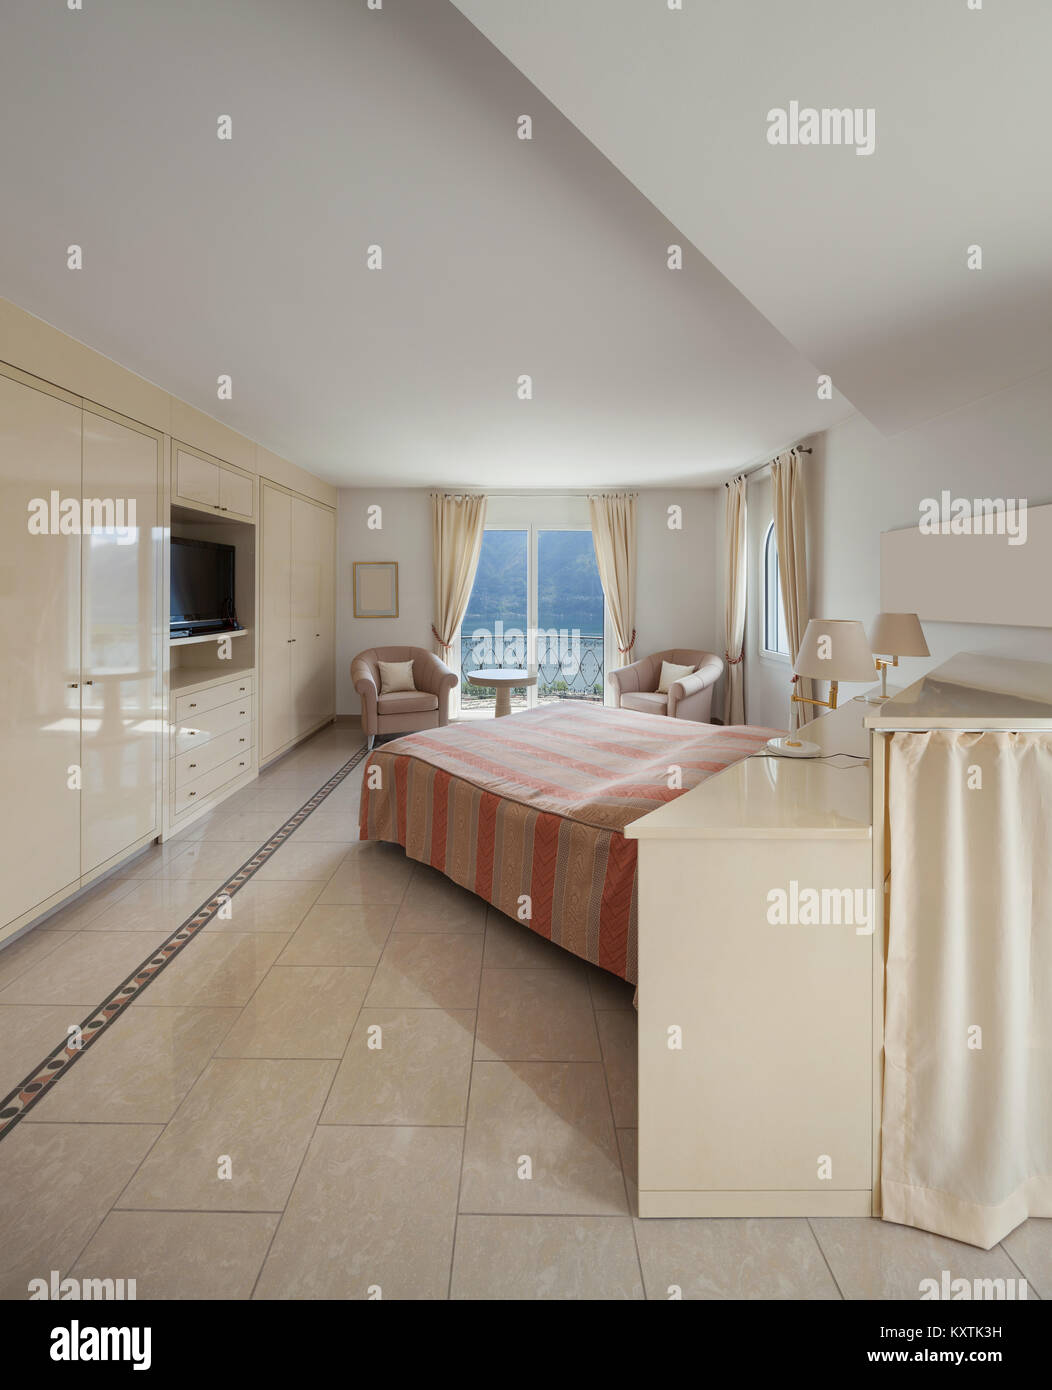 Interior of a luxury home, comfortable bedroom Stock Photo